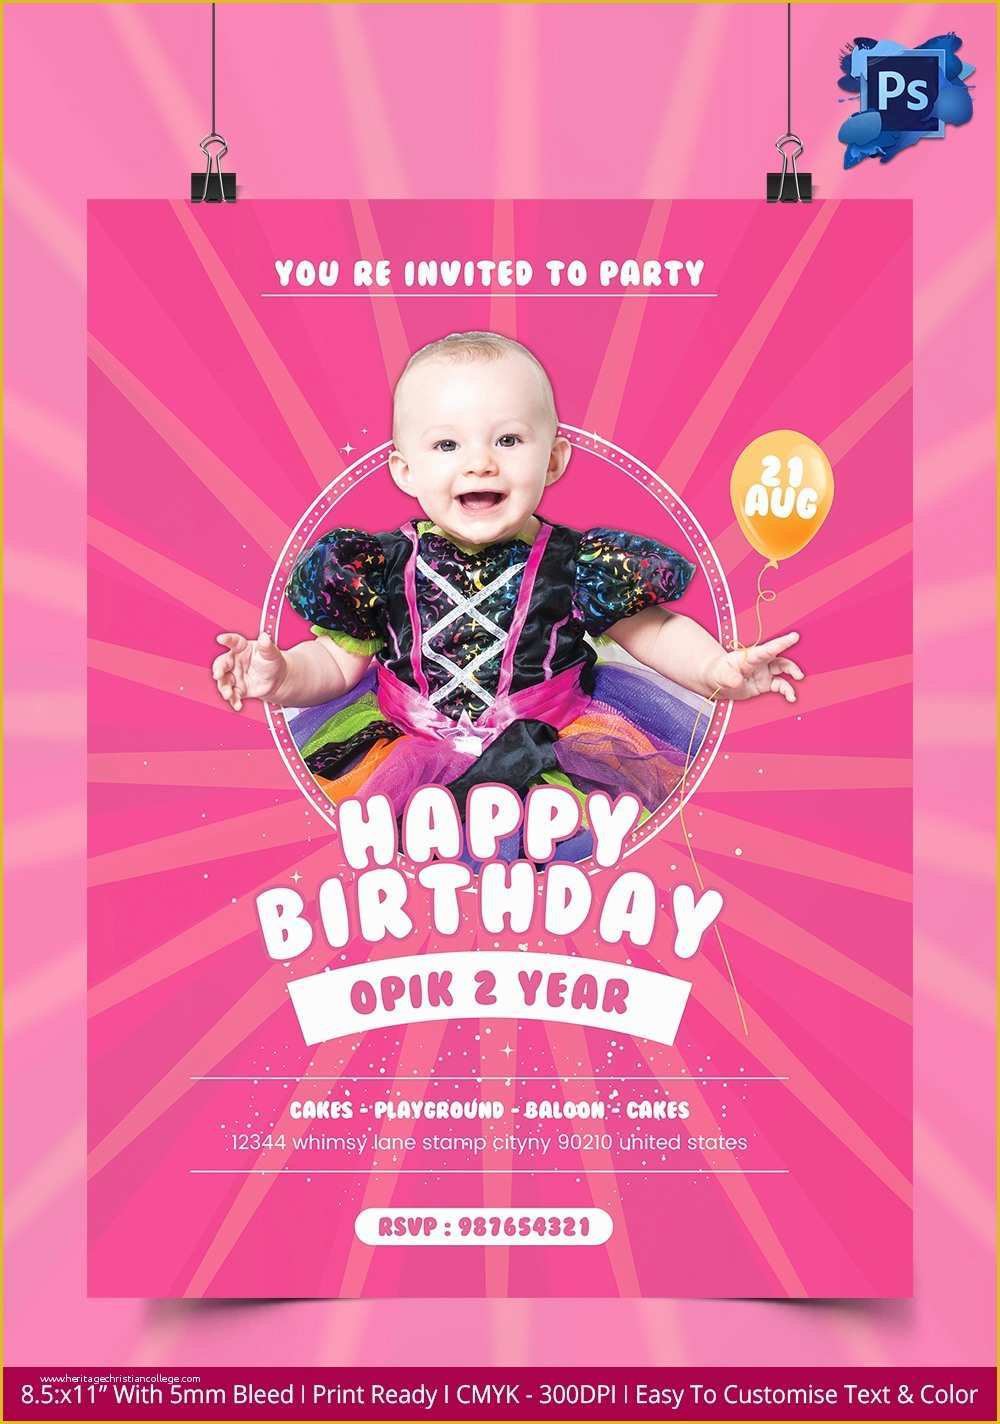 Free Party Flyer Templates Of 135 Psd Flyer Templates – Free Psd Eps Ai Indesign